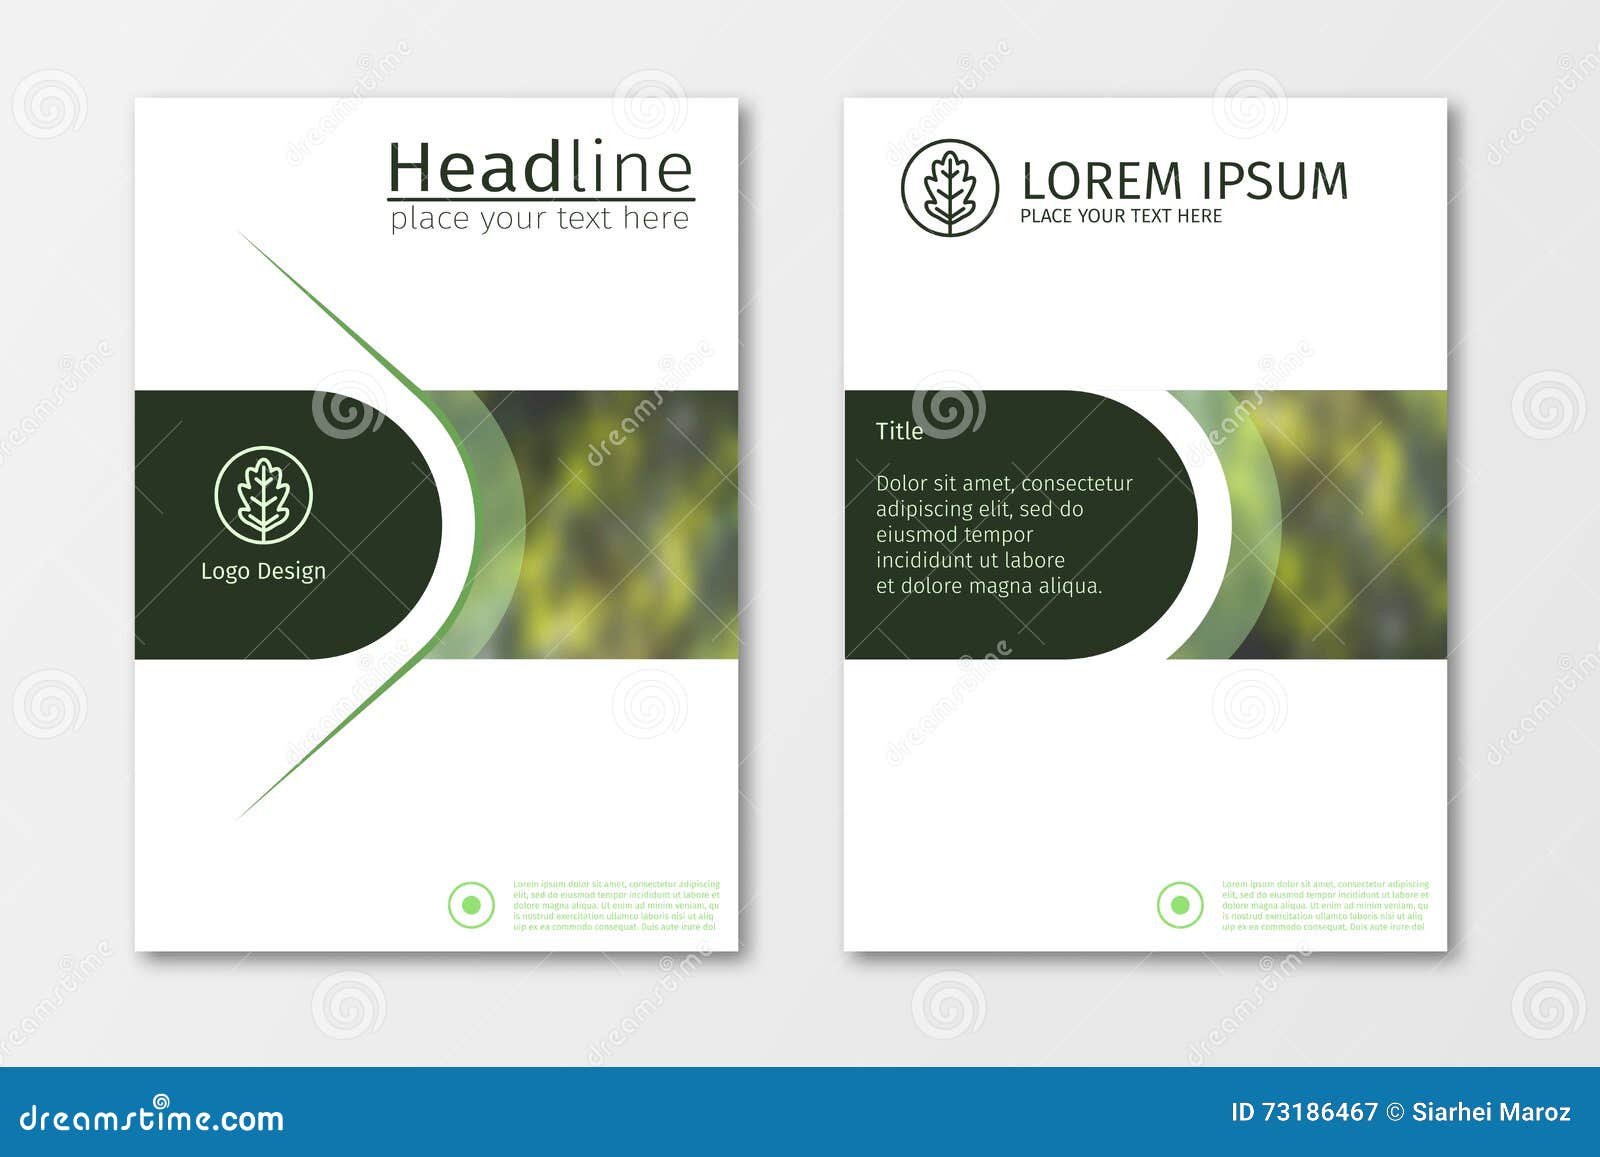 business document presentation front cover